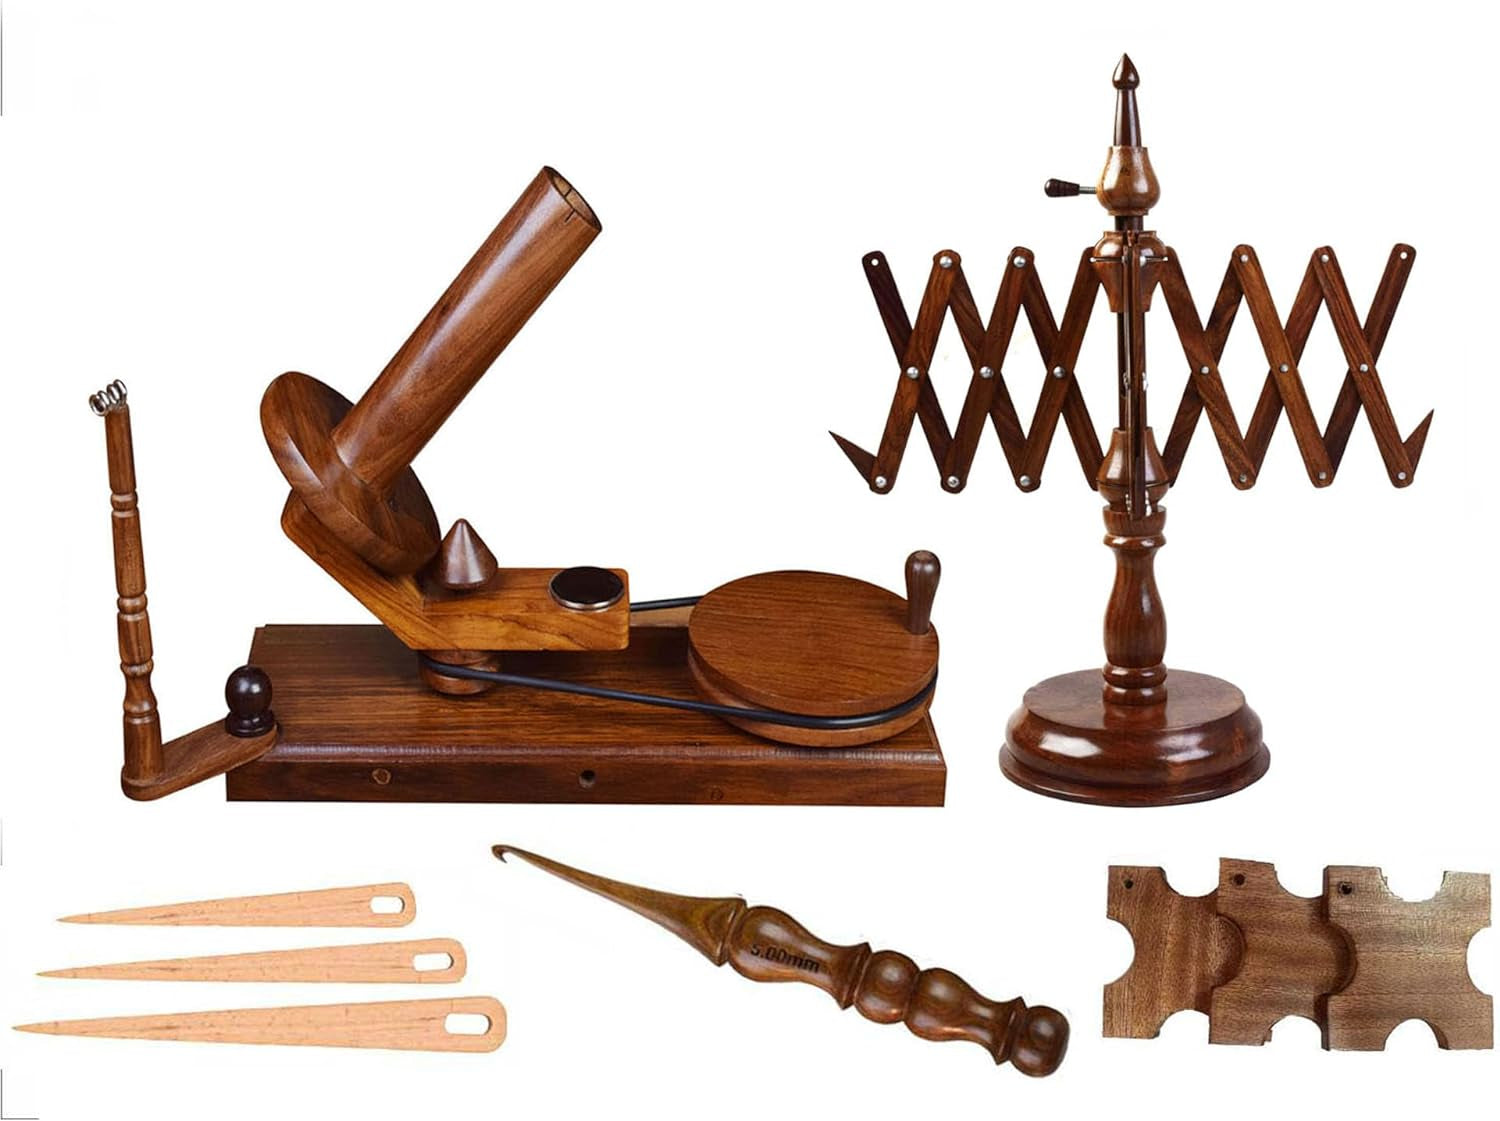 𝐋𝐚𝐫𝐠𝐞 𝐂𝐚𝐩𝐚𝐜𝐢𝐭𝐲 𝐘𝐚𝐫𝐧 𝐖𝐢𝐧𝐝𝐞𝐫 - Hand Operated Wooden Yarn Ball Winder. Support 10 to 12 Oz of Yarn Fiber Wool String with Free Crochet Hook (7PCS Rosewood Winder)